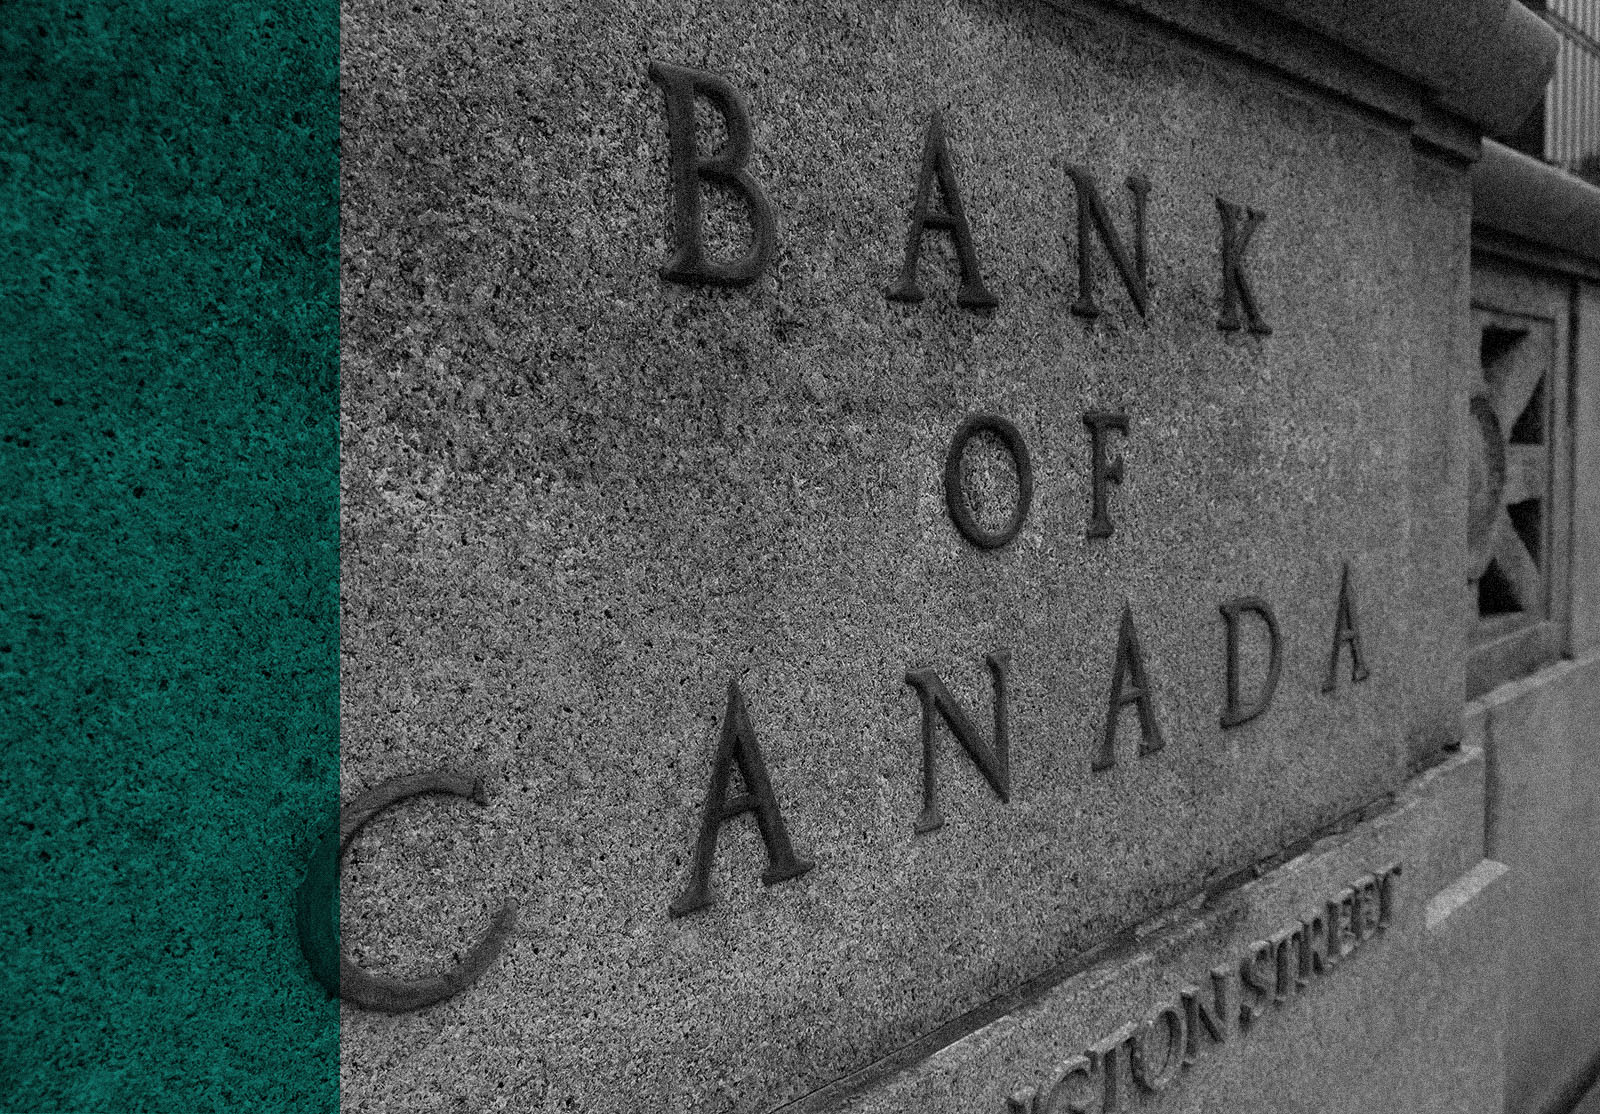 Sign Bank of Canada on the Canadian bank's granite facade.